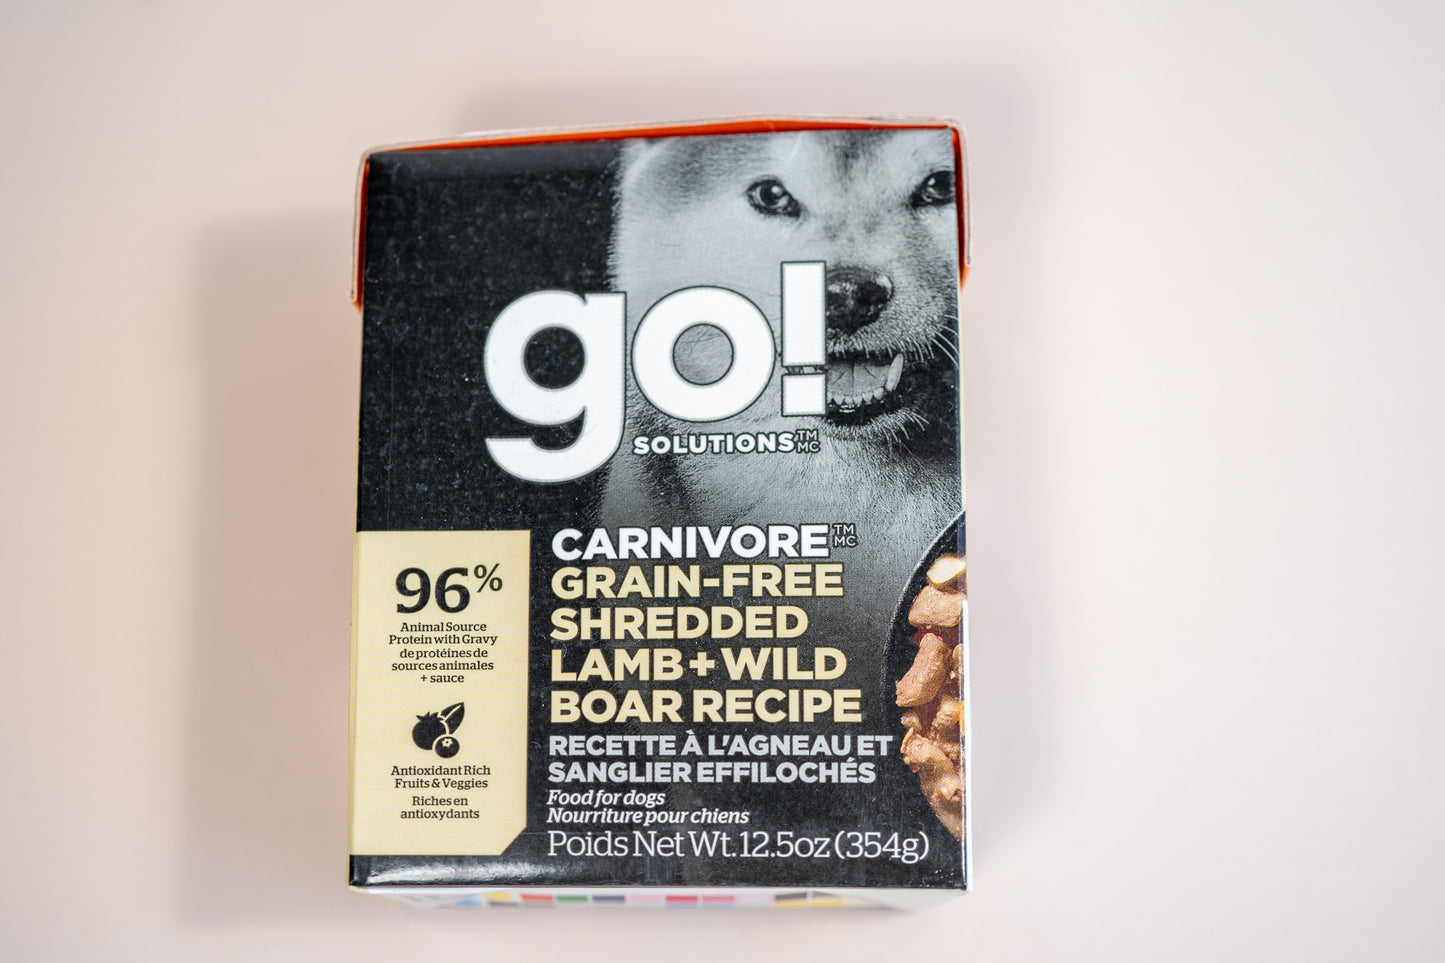 Food for dogs with 96% animal source protein with gravy and antioxidant rich fruits and veggies.